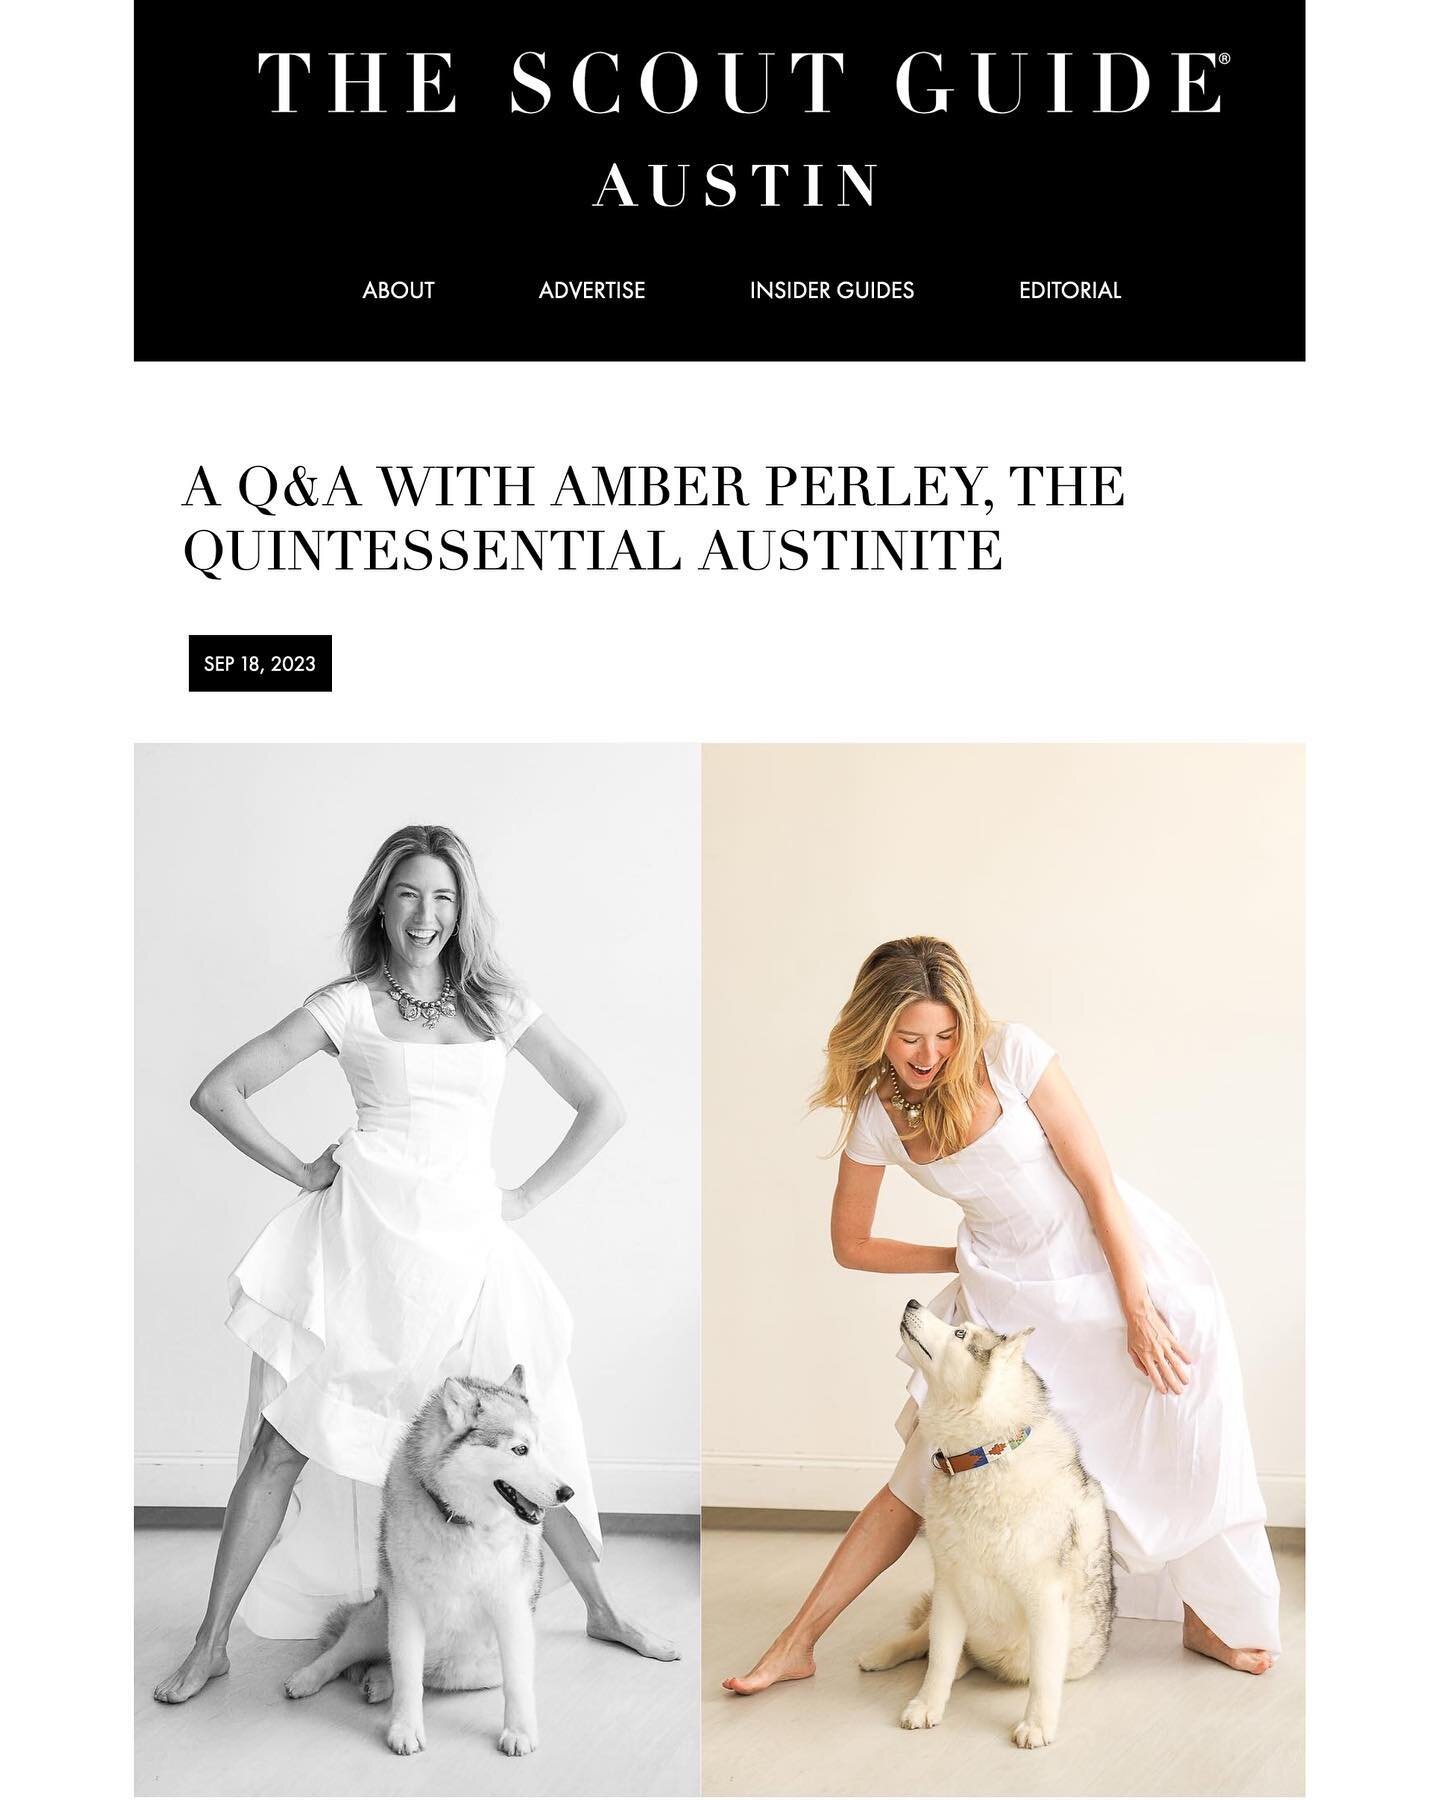 Thank you @tsgaustin for the feature 🤍🖤
Grateful for your coverage on Austin creatives &amp; our community ! 

@tsgaustin Repost - Meet Amber Perley, the quintessential Austinite.
She&rsquo;s a photographer (you can find her in Volume 10), marketin